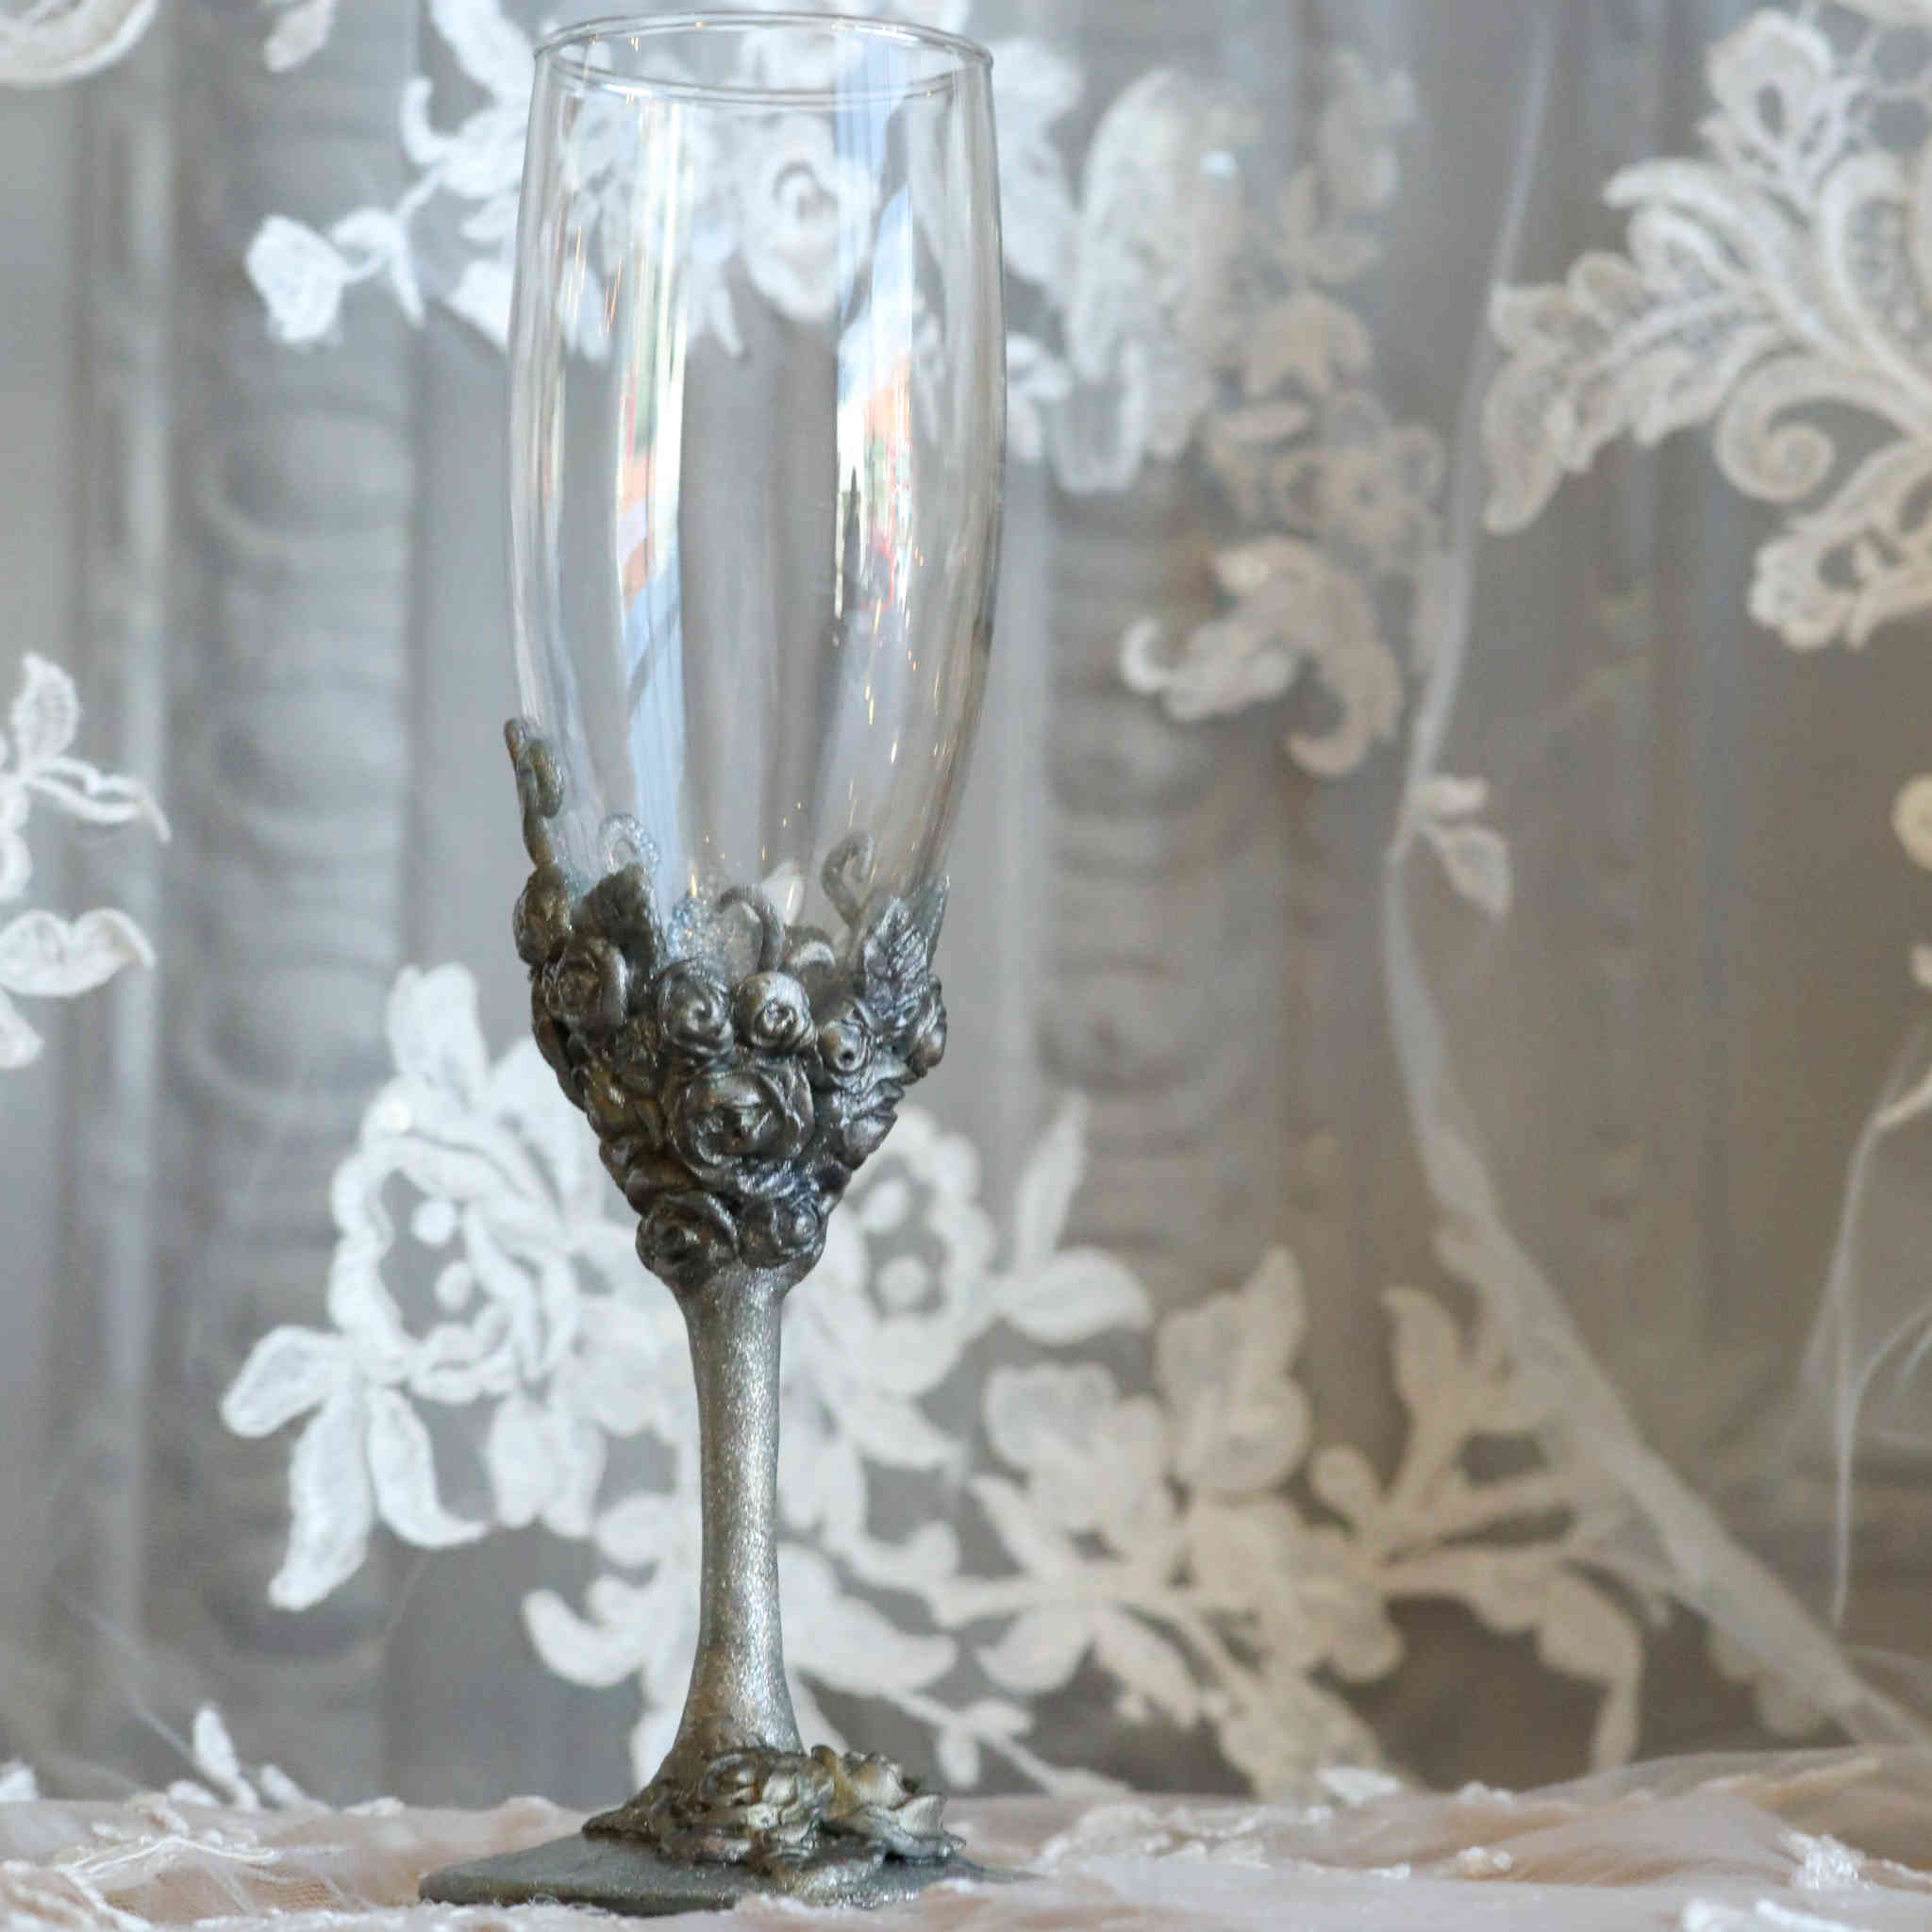 Crystal Champagne Flutes, Perfect ,stemmed Crystal Wine Glasses